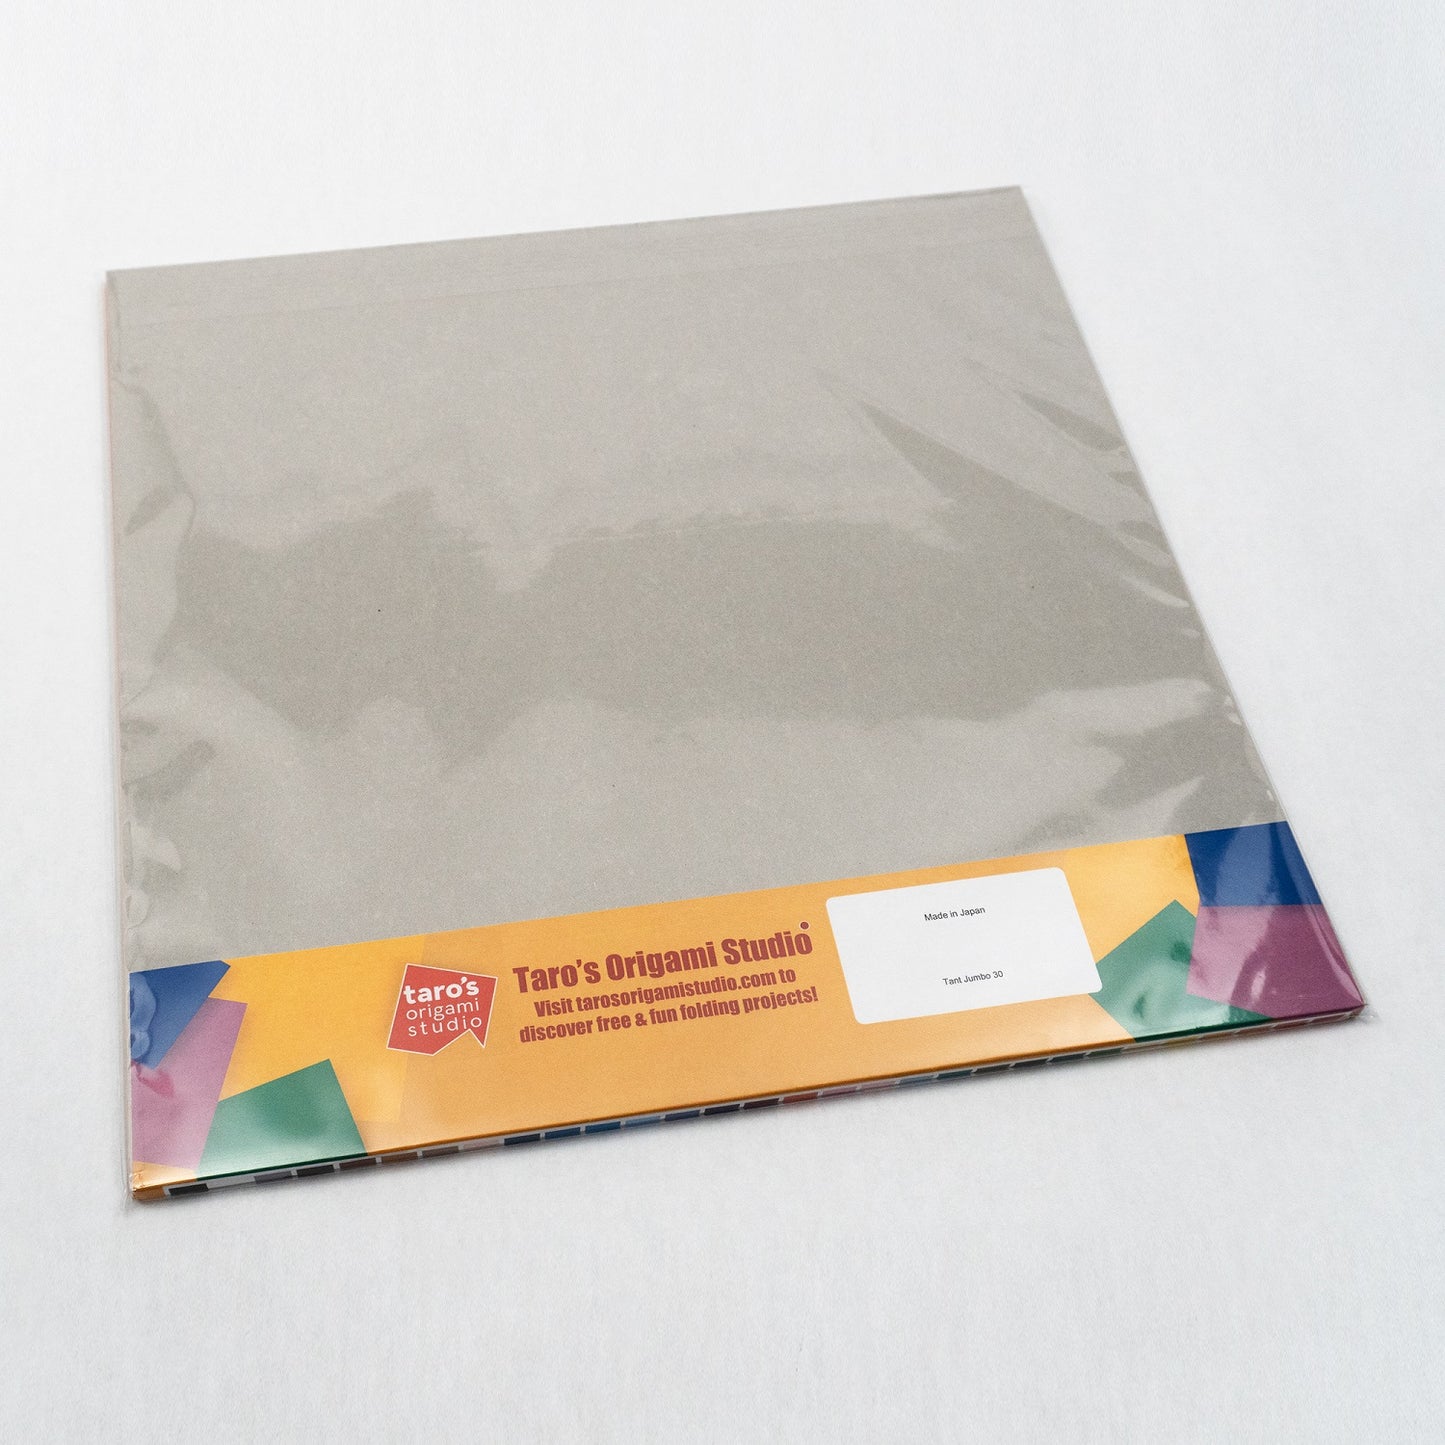 TANT Jumbo size 13.8 inch (35cm) Japanese Origami Paper, 50 Double Sided Sheets